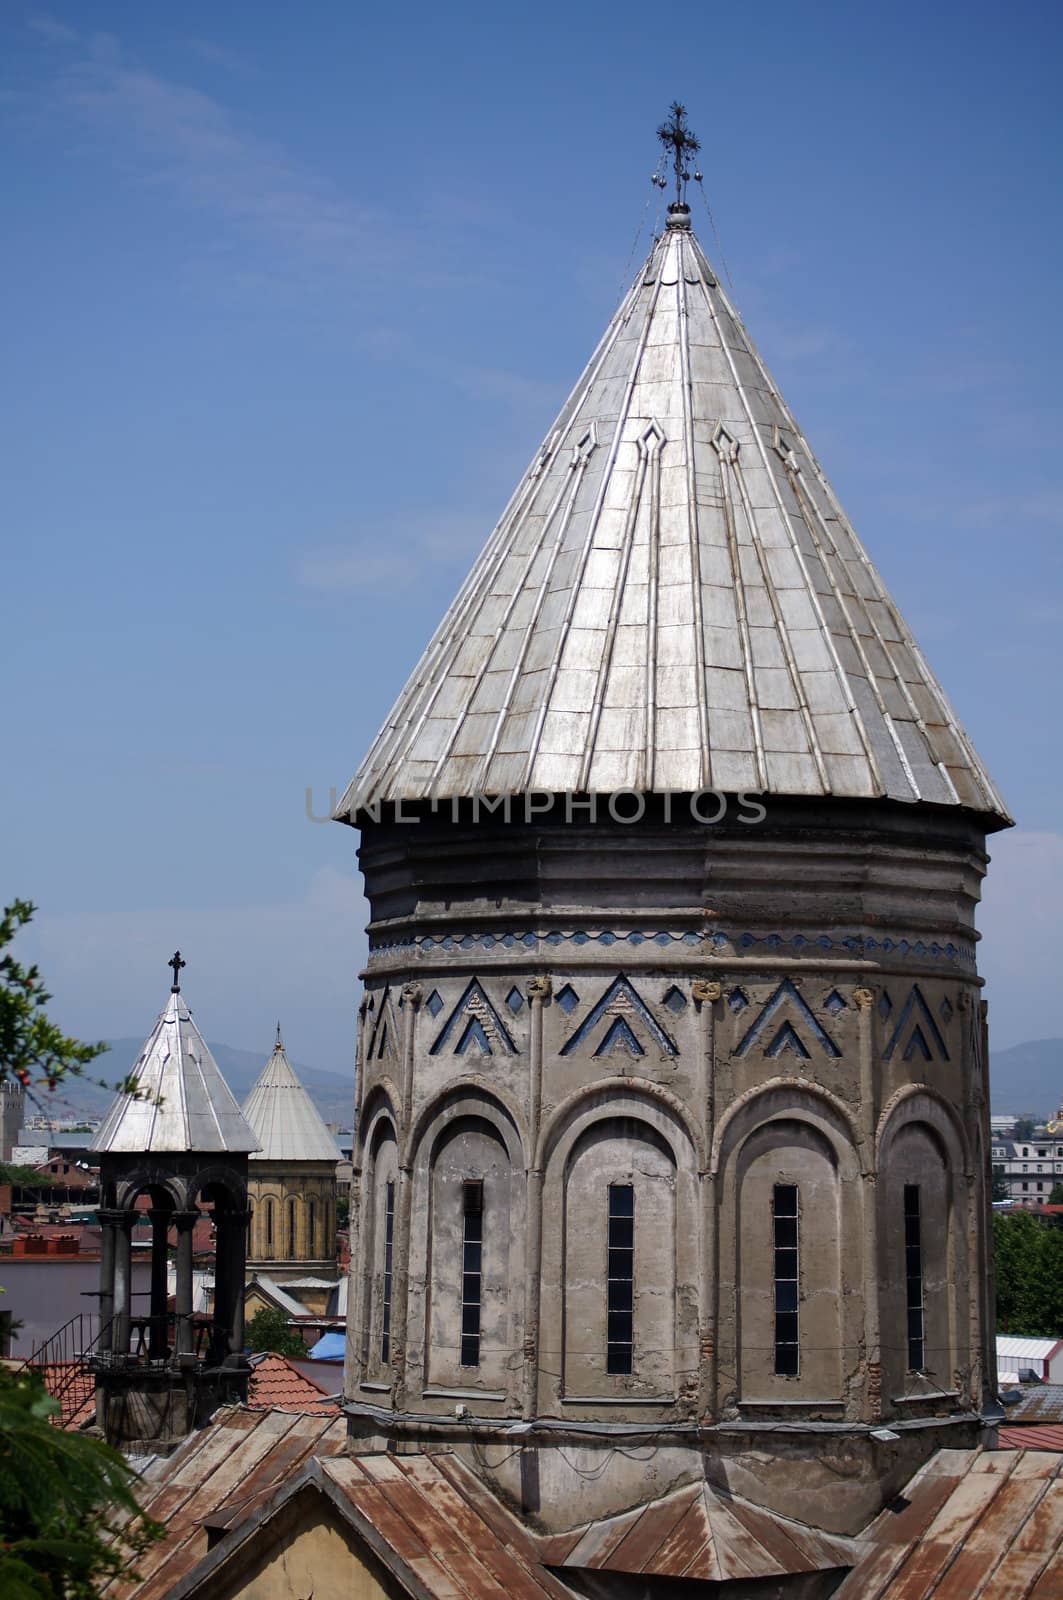 Dome of main armenian cathedral of Surb Gevork in Tbilisi